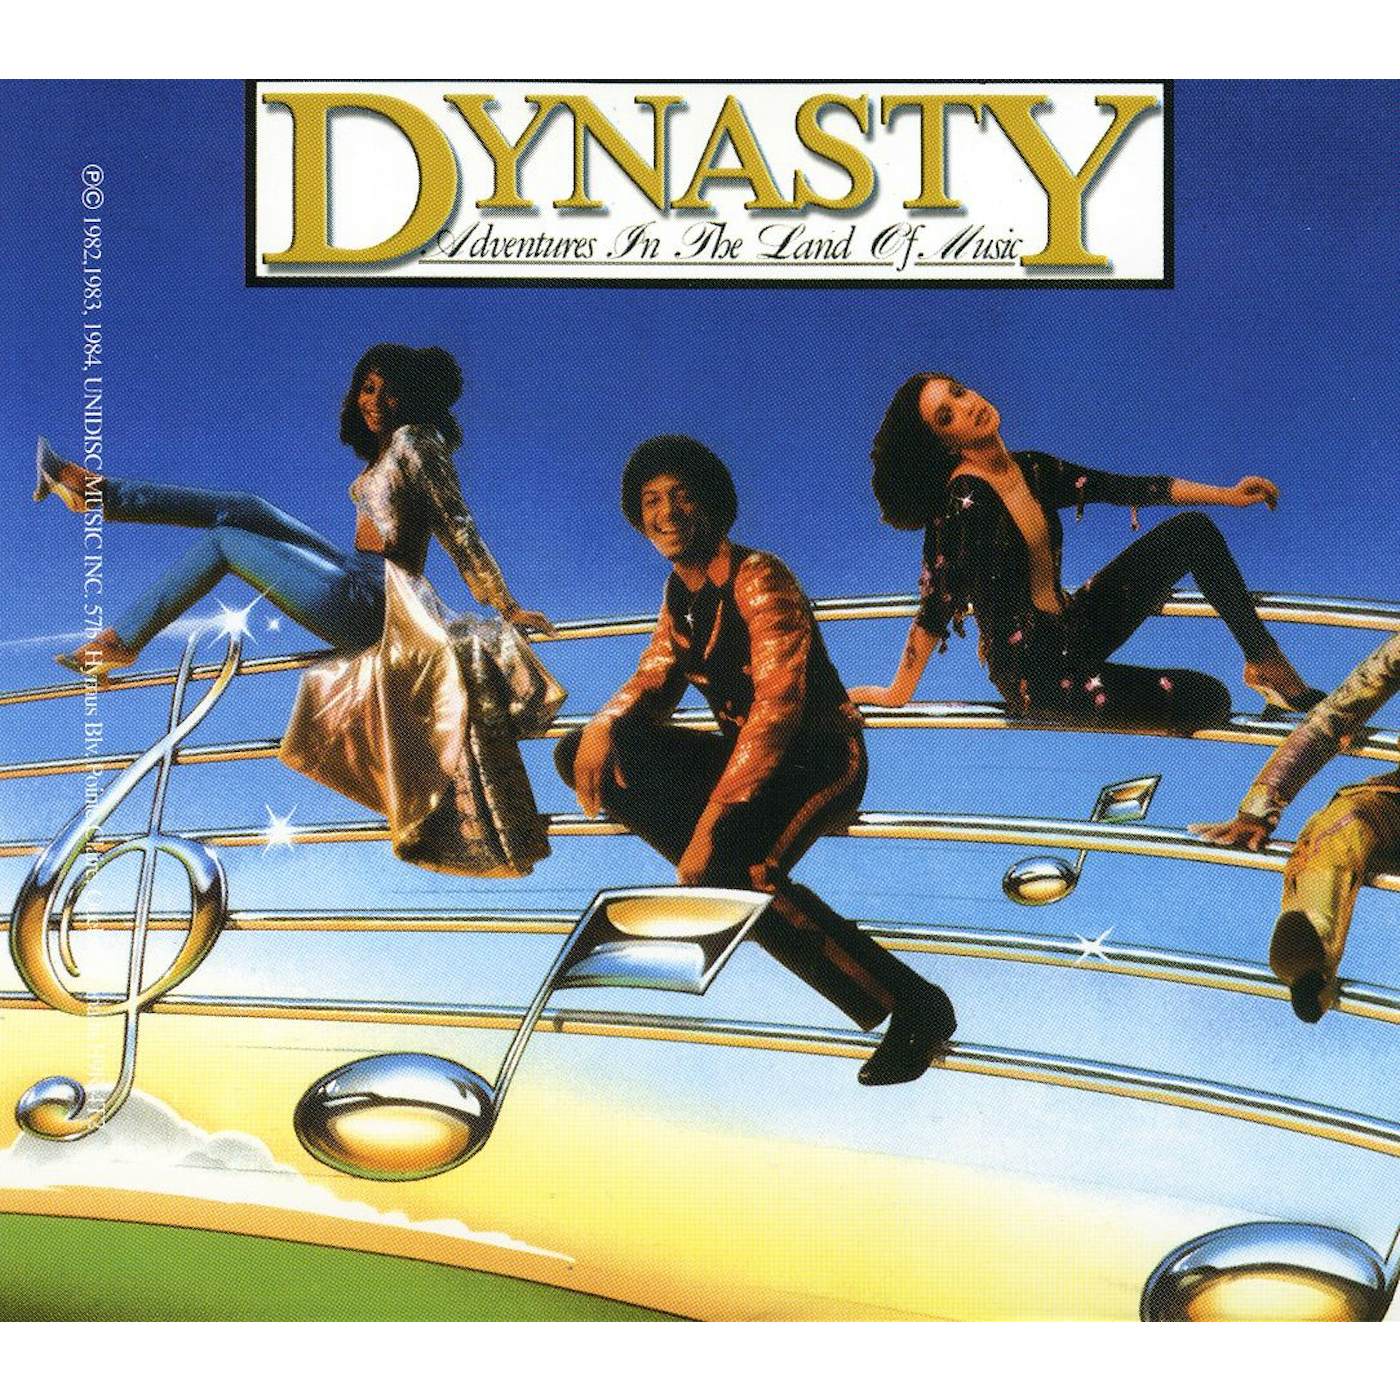 Dynasty ADVENTURES IN THE LAND CD